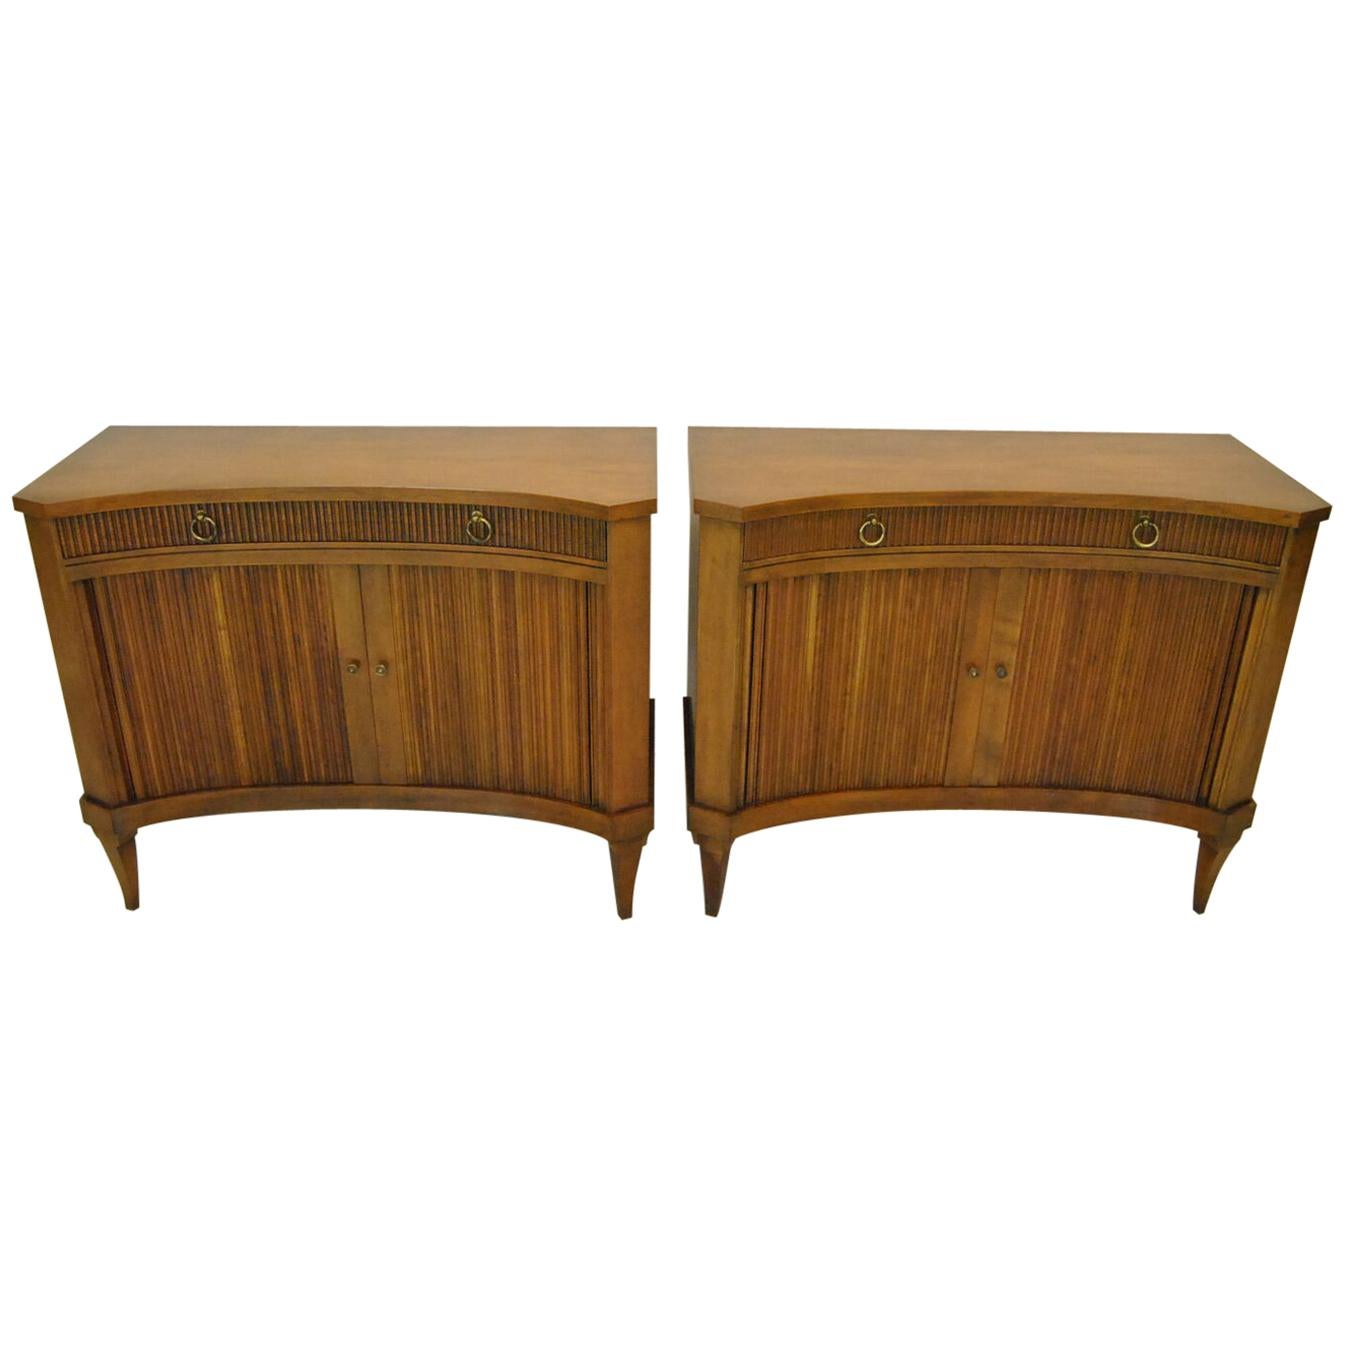 Pair of Midcentury Regency Style Curved Front Tambour Door Chests